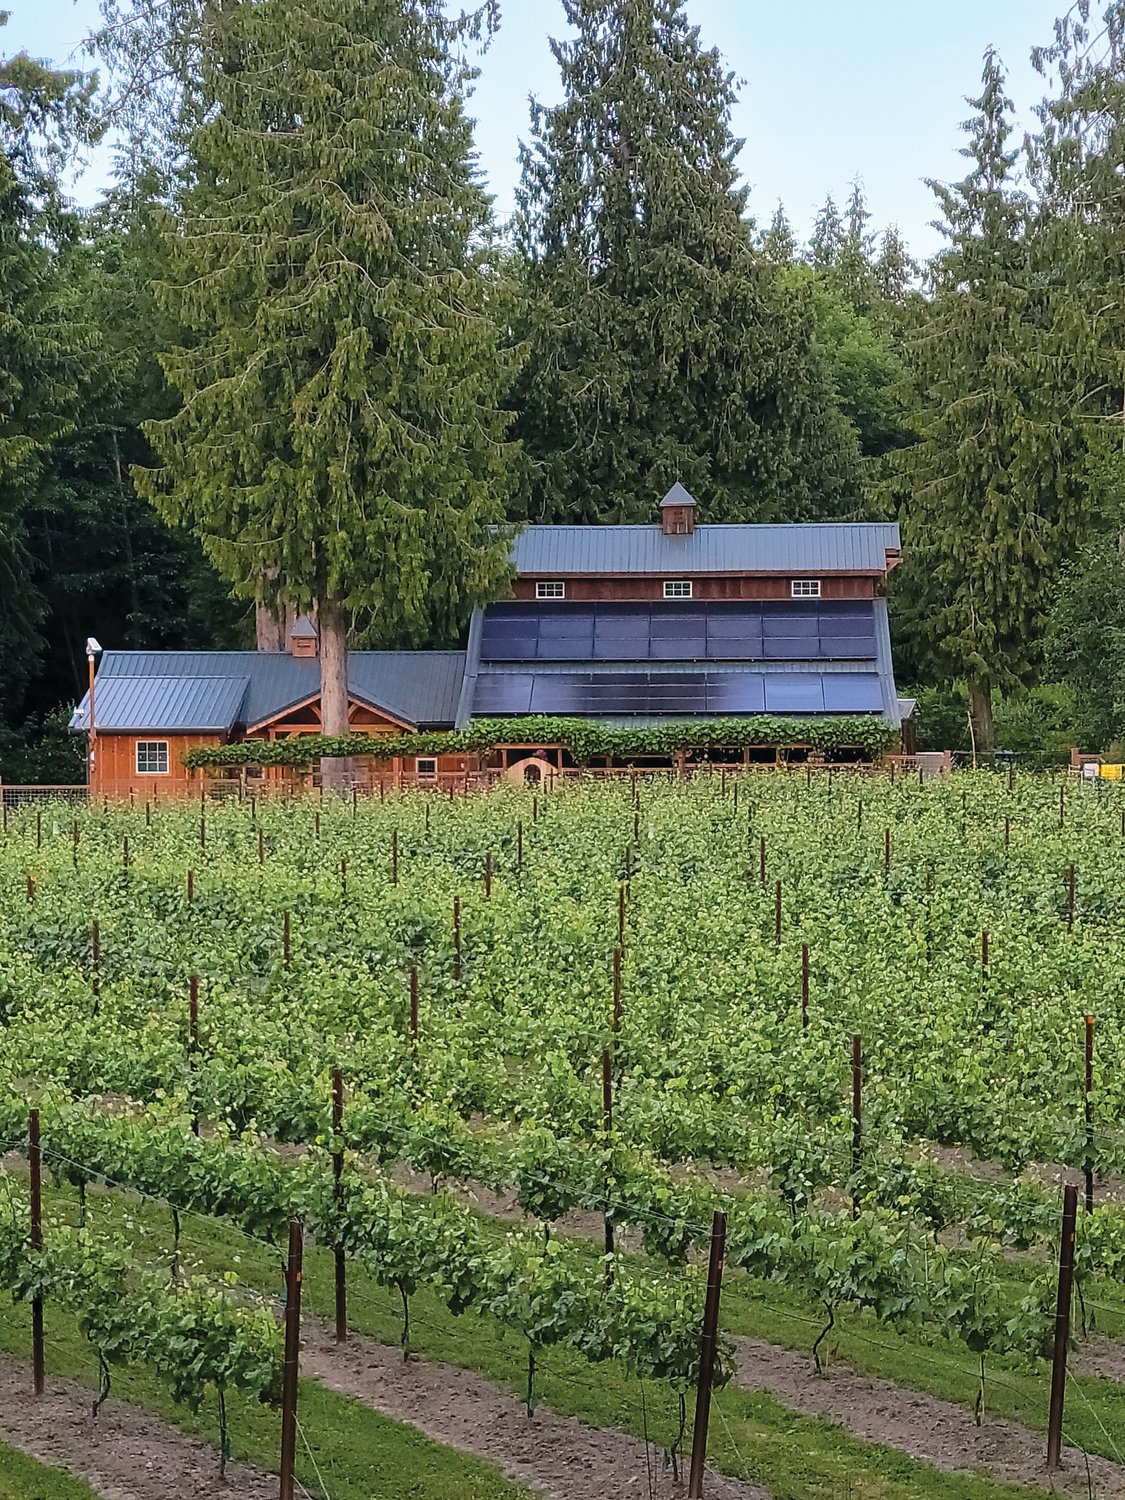 The Raincoast Farms vineyards bursts with green as long summer days ripen vines and ready fruit for harvest.